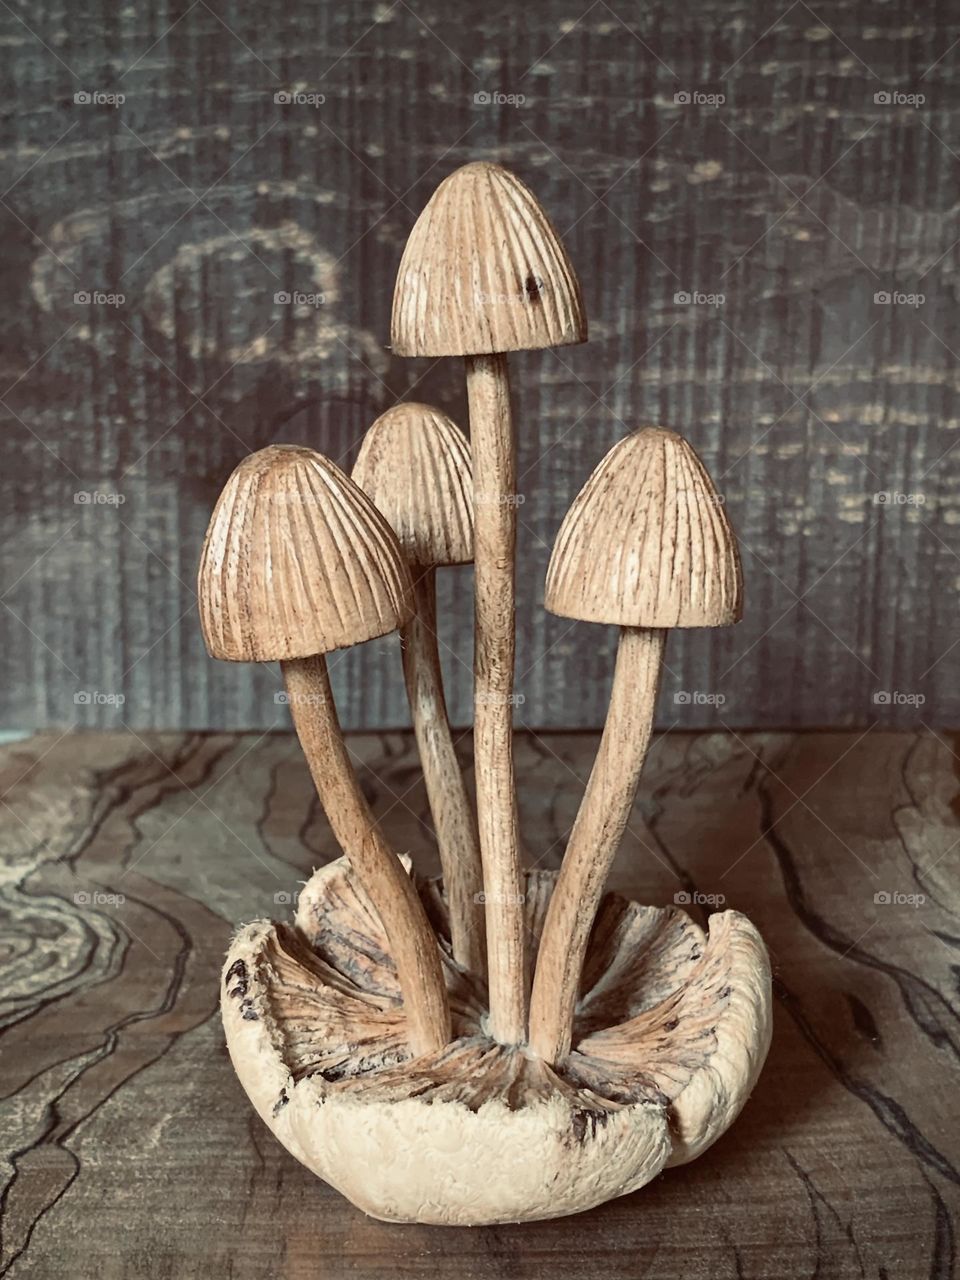 Carved wooden mushrooms against a background of different types of wood